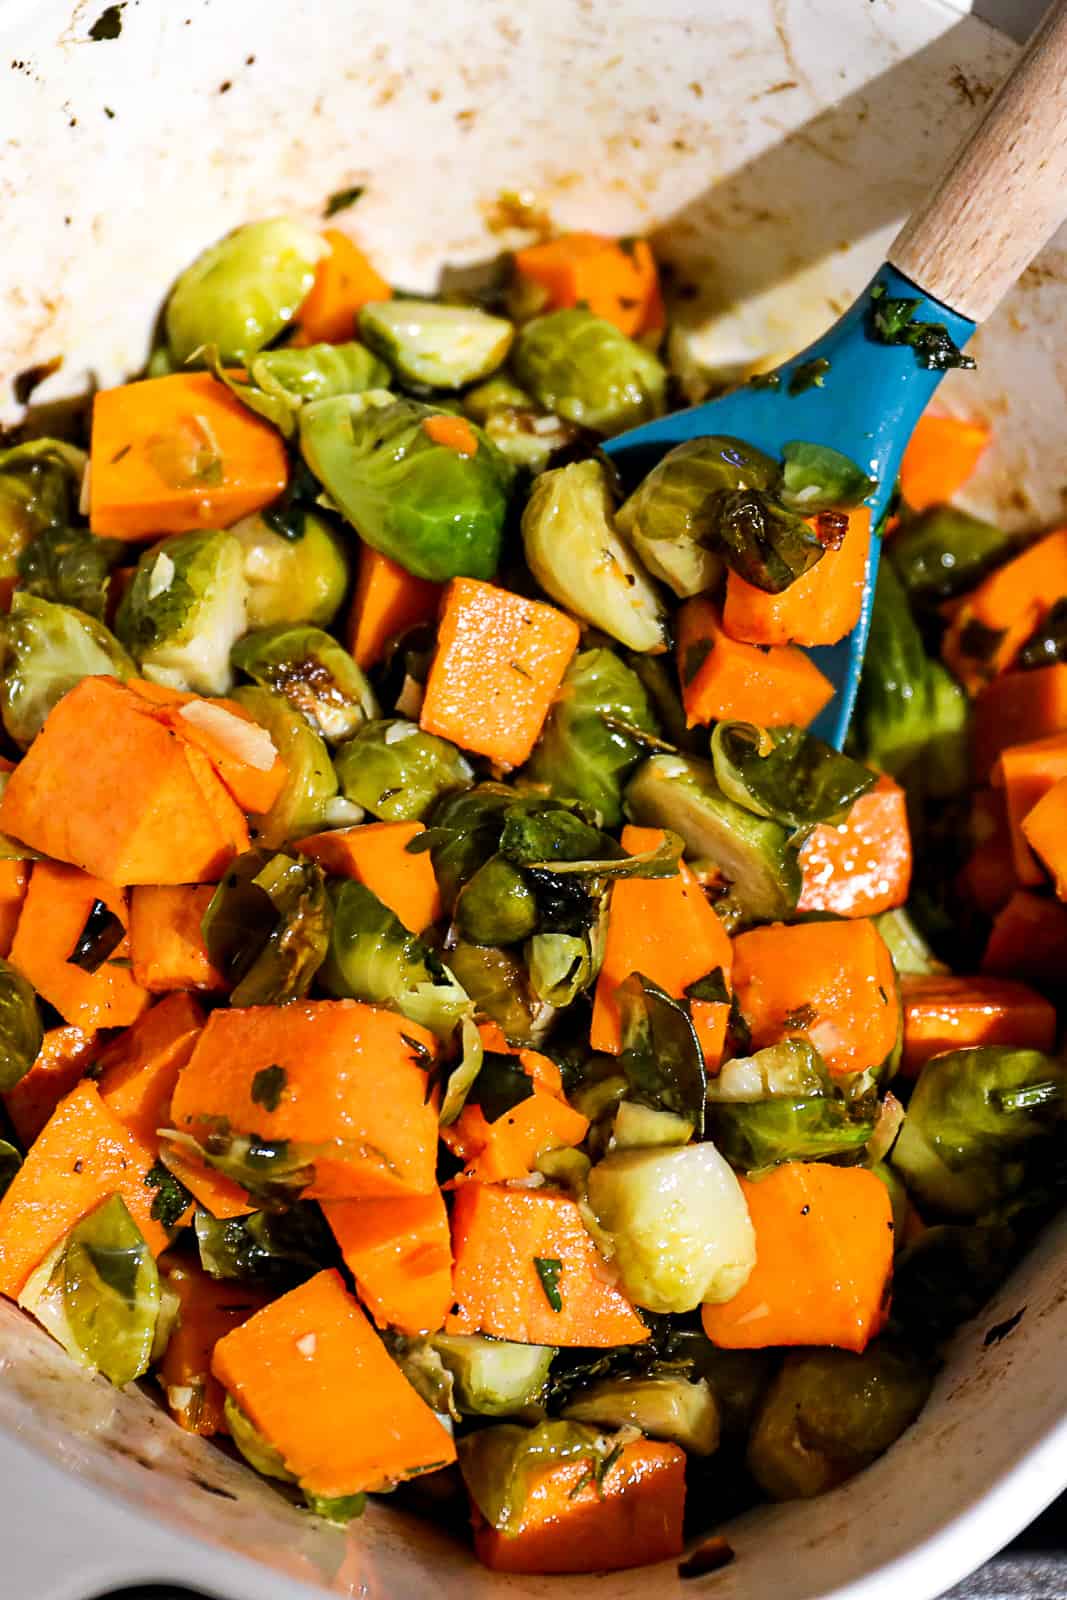 Oven Roasted Brussel Sprouts And Sweet Potatoes in a Baking Dish